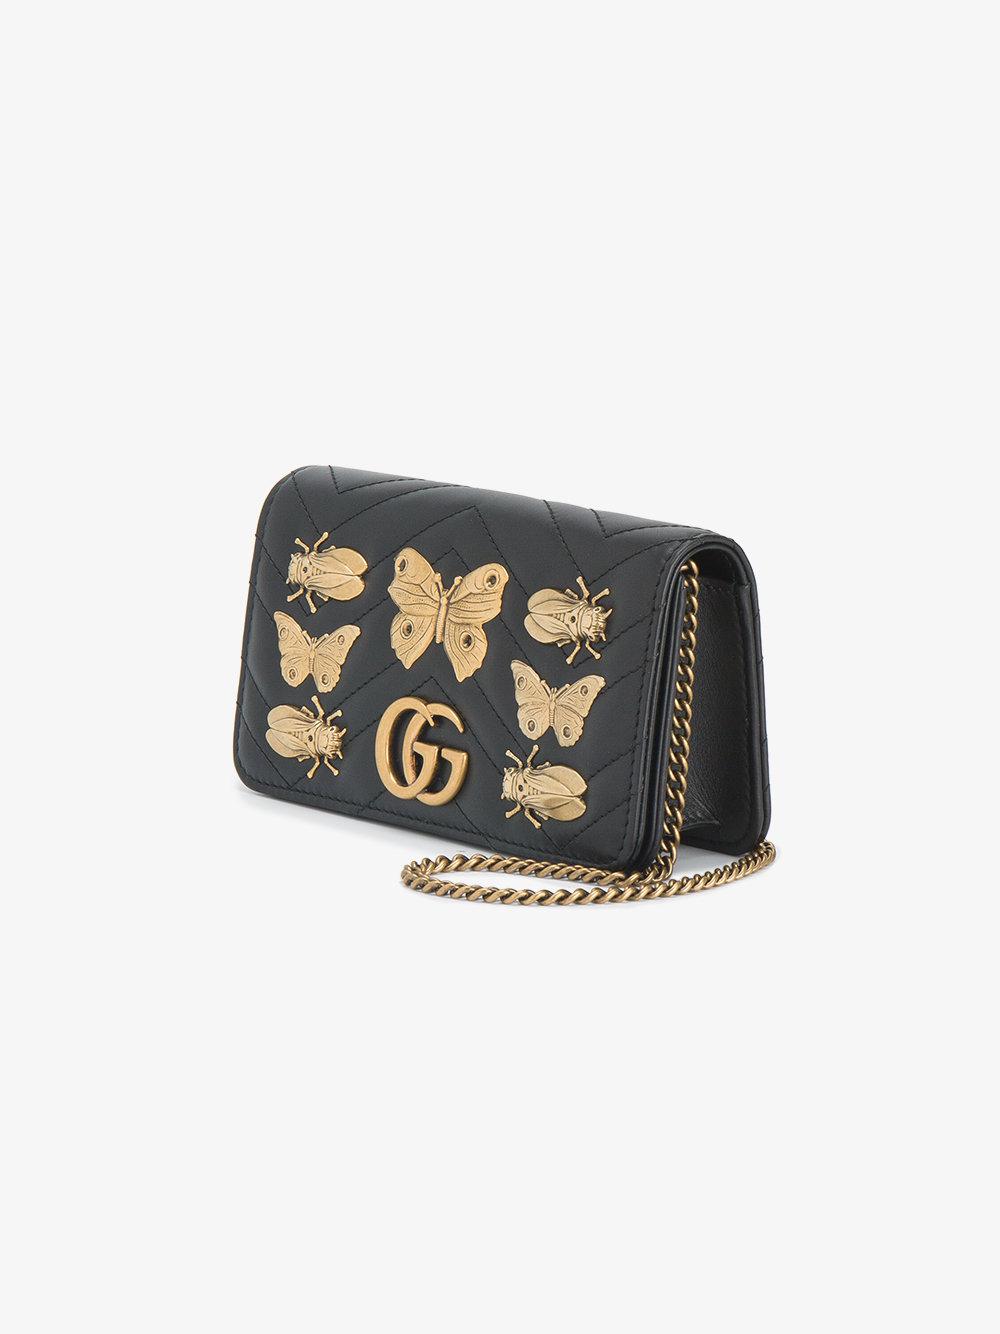 Gucci Leather Gg Marmont Bug Embellished Chain Wallet Bag in Black | Lyst